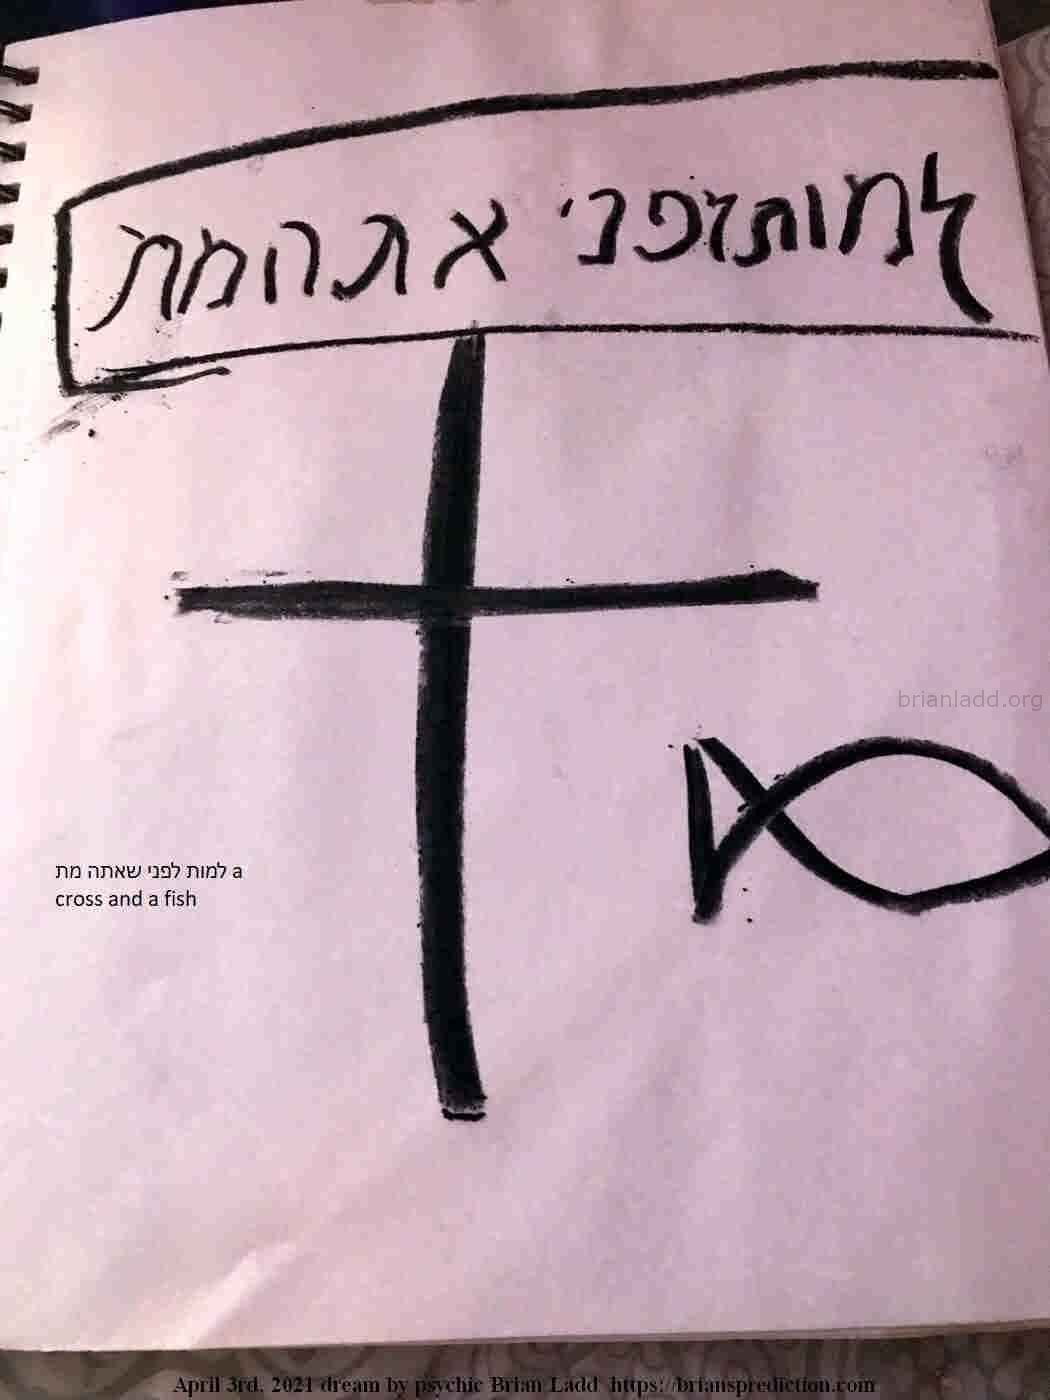 14698 3 April 2021 1 - ×????????•???? ×??????????×™ ×????????????” ×?????? a Cross and a Fish....
×????????•???? ×??????????×™ ×????????????” ×?????? a Cross and a Fish.
